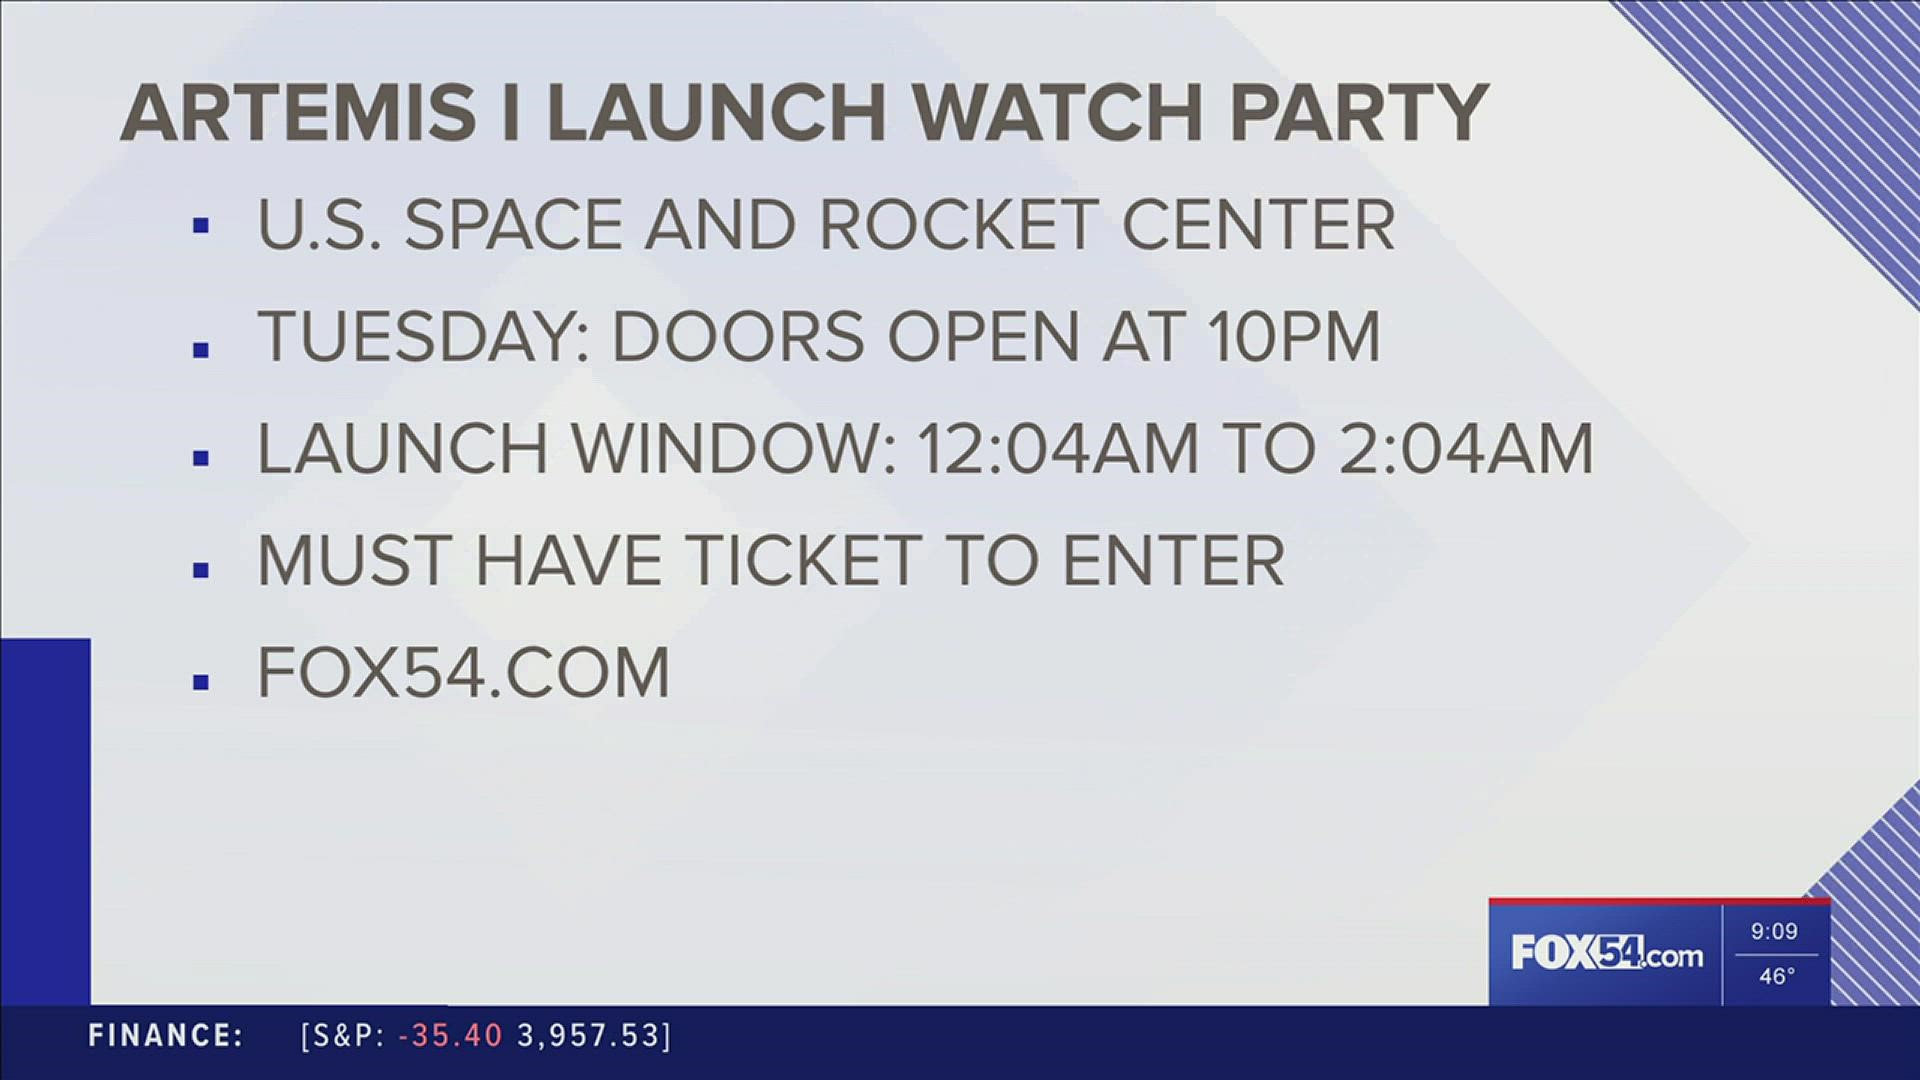 If you're interested in watching, the U.S. Space & Rocket Center is holding a launch party. Doors open Tuesday evening at ten. You must have a ticket, and it's FREE!